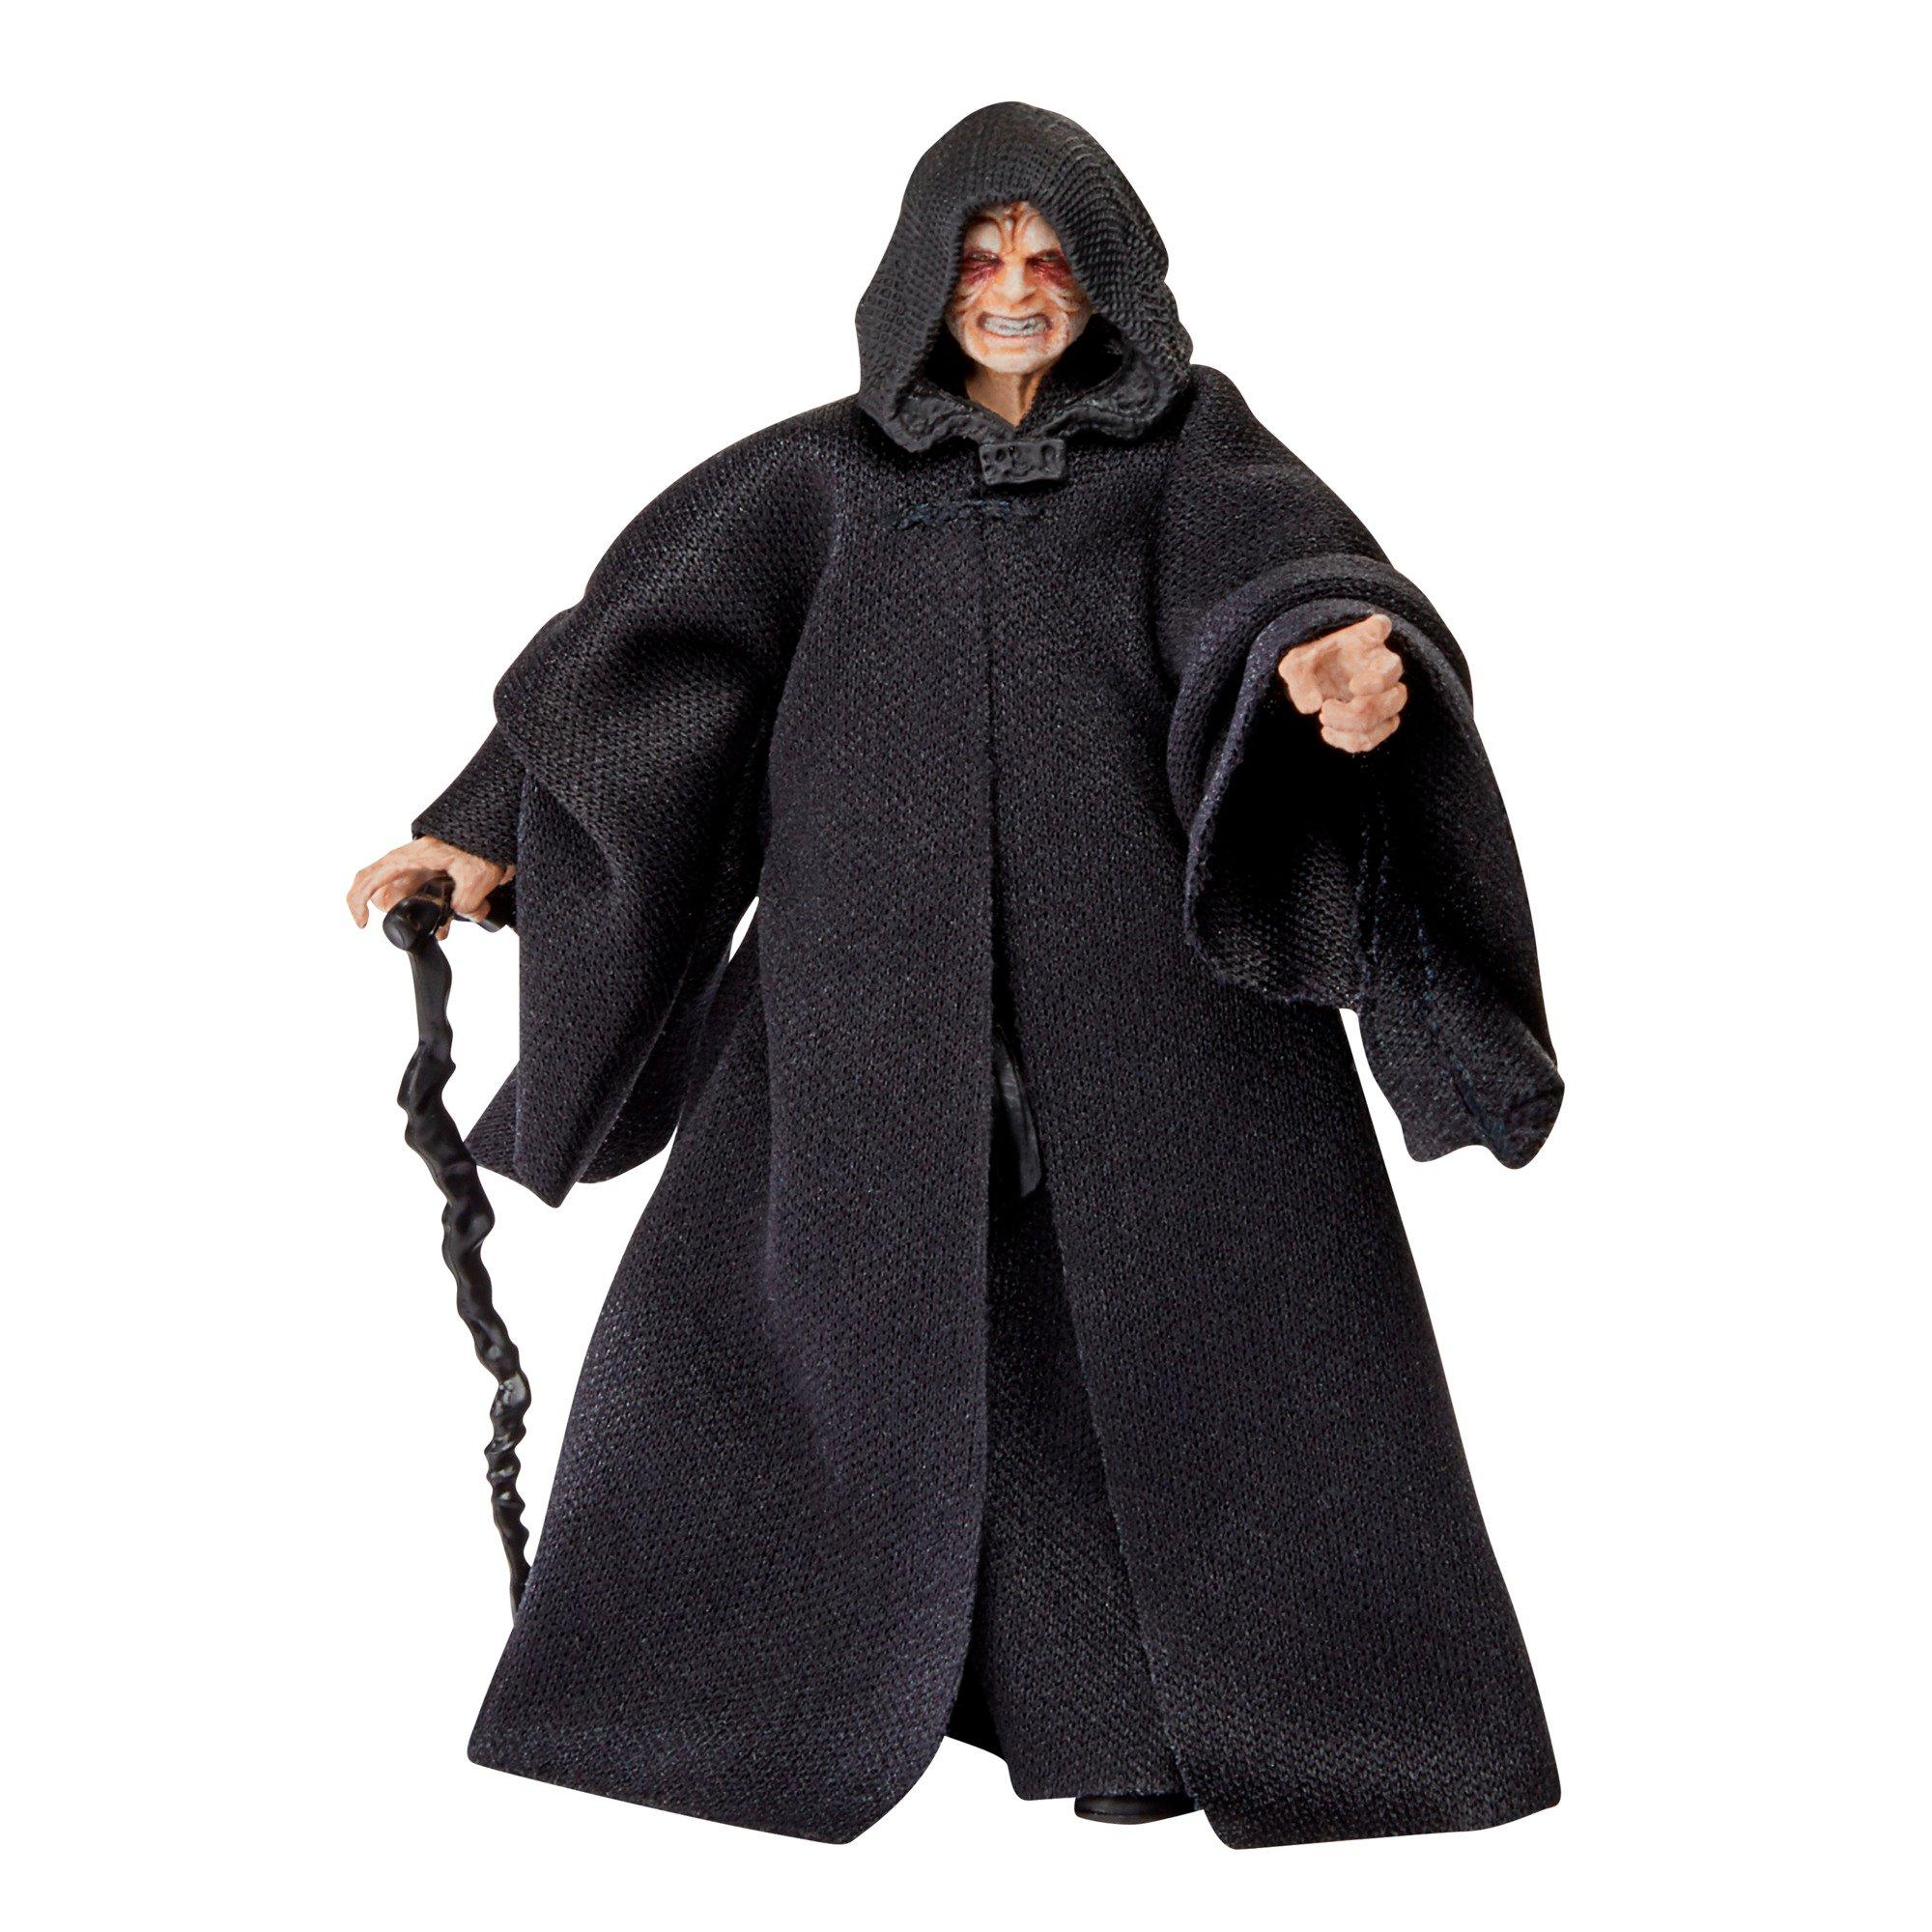 Kenner Star Wars Emperor Palpatine With Walking Stick Action Figure for sale online